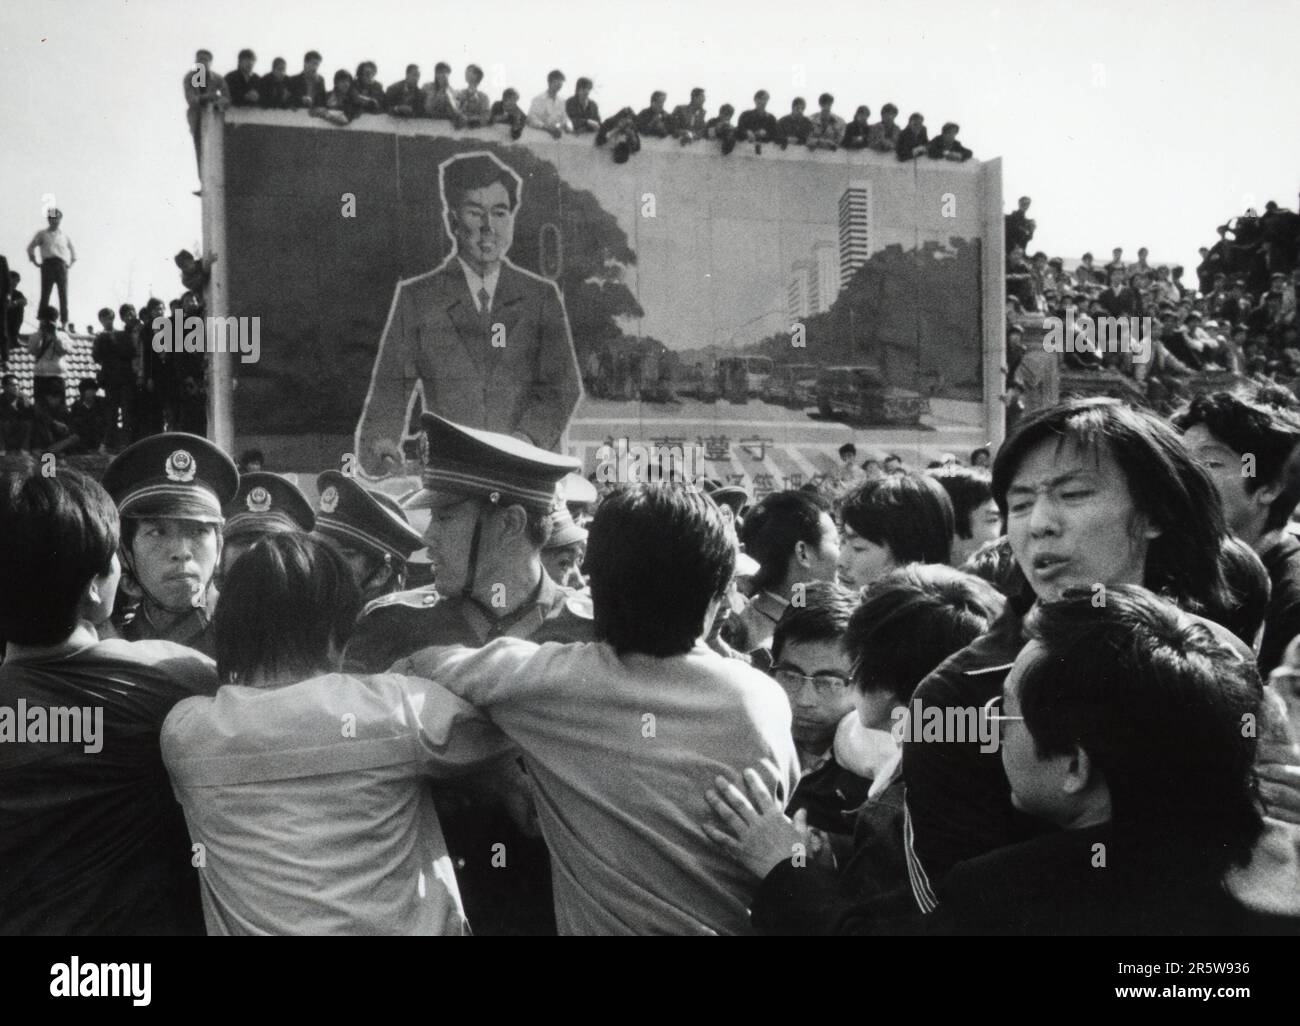 Chinese pro-democracy protesters break through police lines on their way to Tiananmen Square on April 27 1989 as crowds of onlookers view the scene from atop a traffic safety billboard. Stock Photo